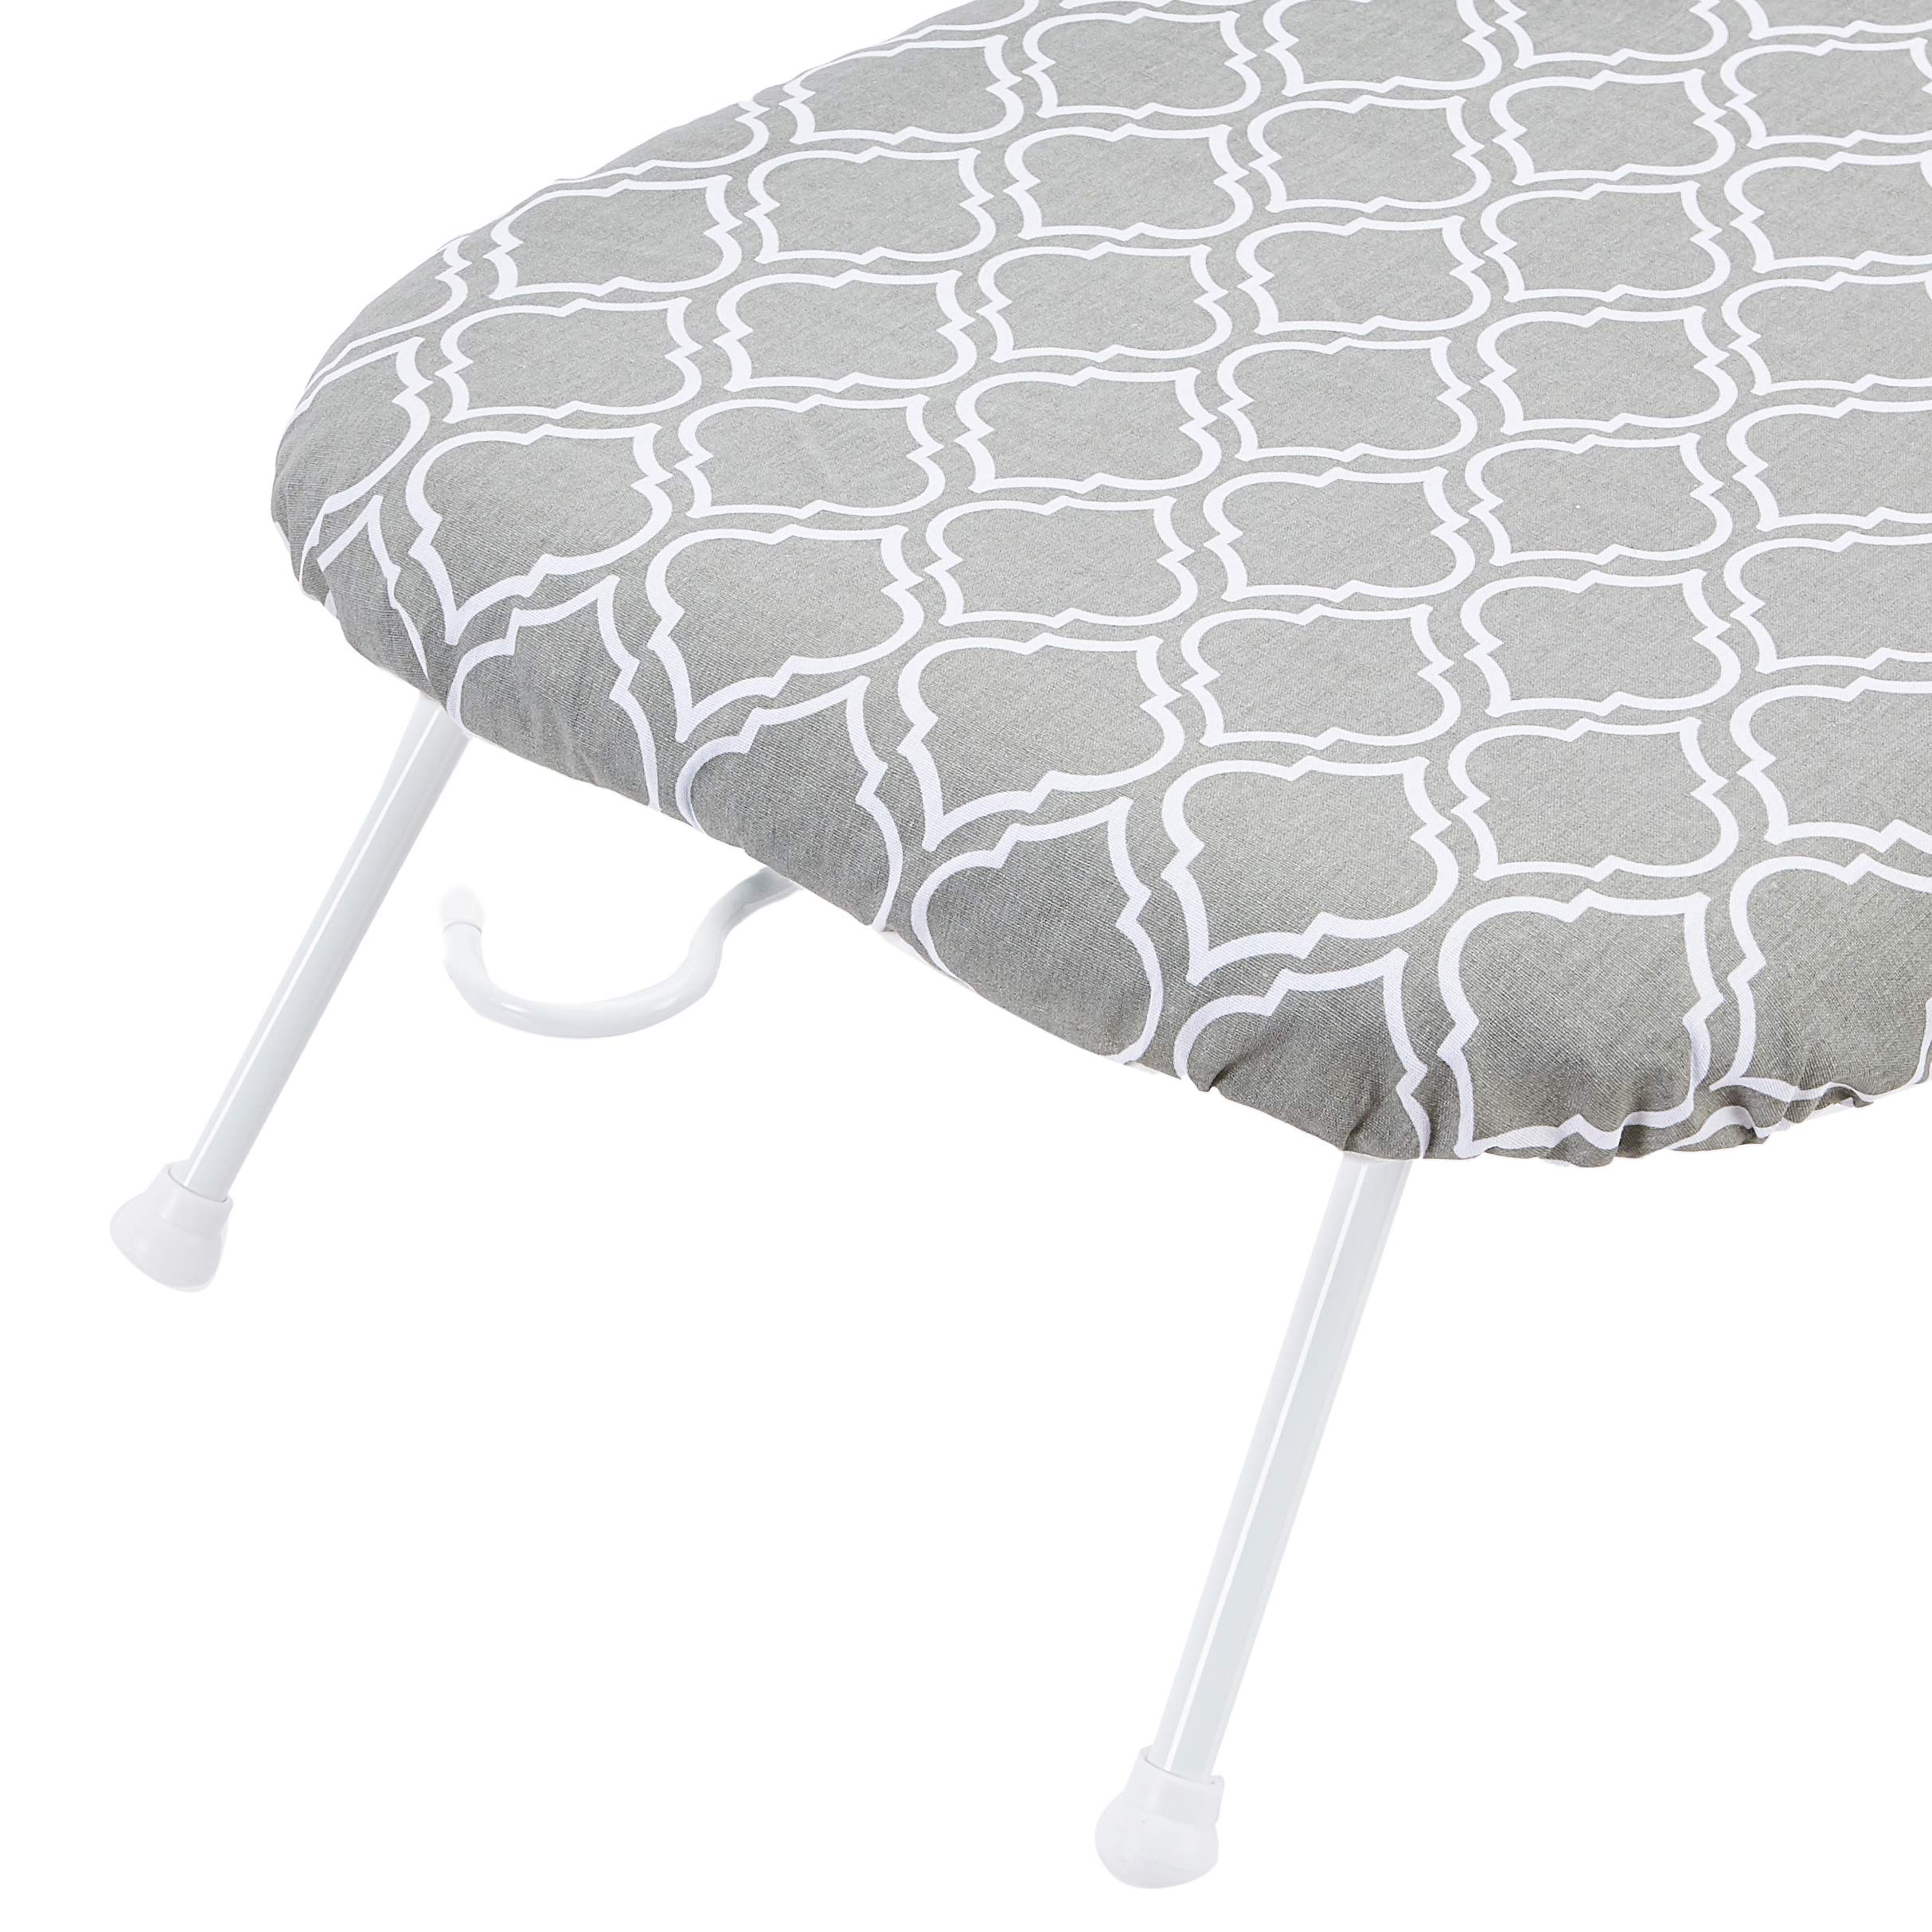 Amazon Basics Tabletop Ironing Board with Folding Legs - Trellis Removable Cover